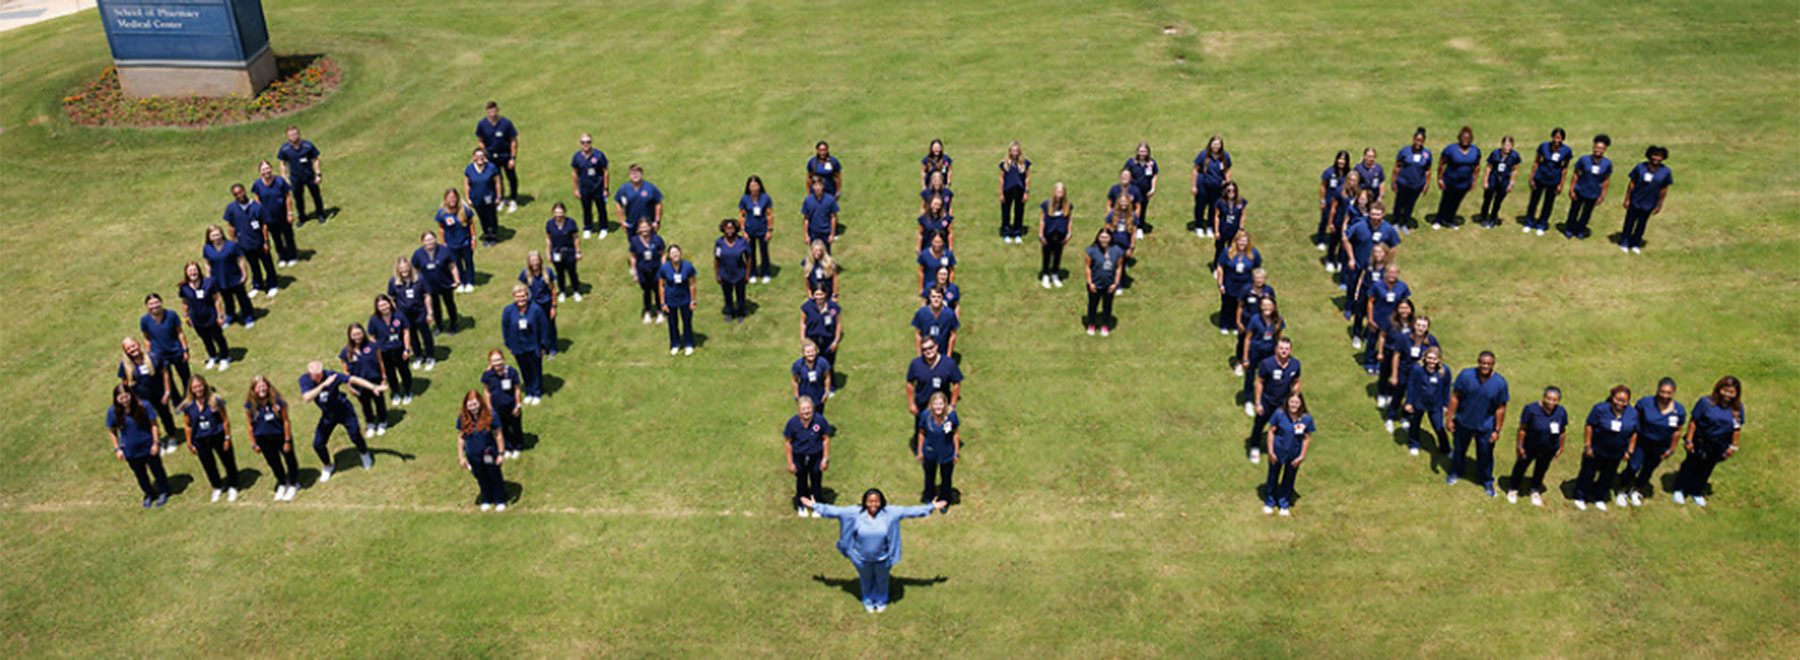 An outdoor group shot of student nurse externs standing in formation to spell the letters U M M C.